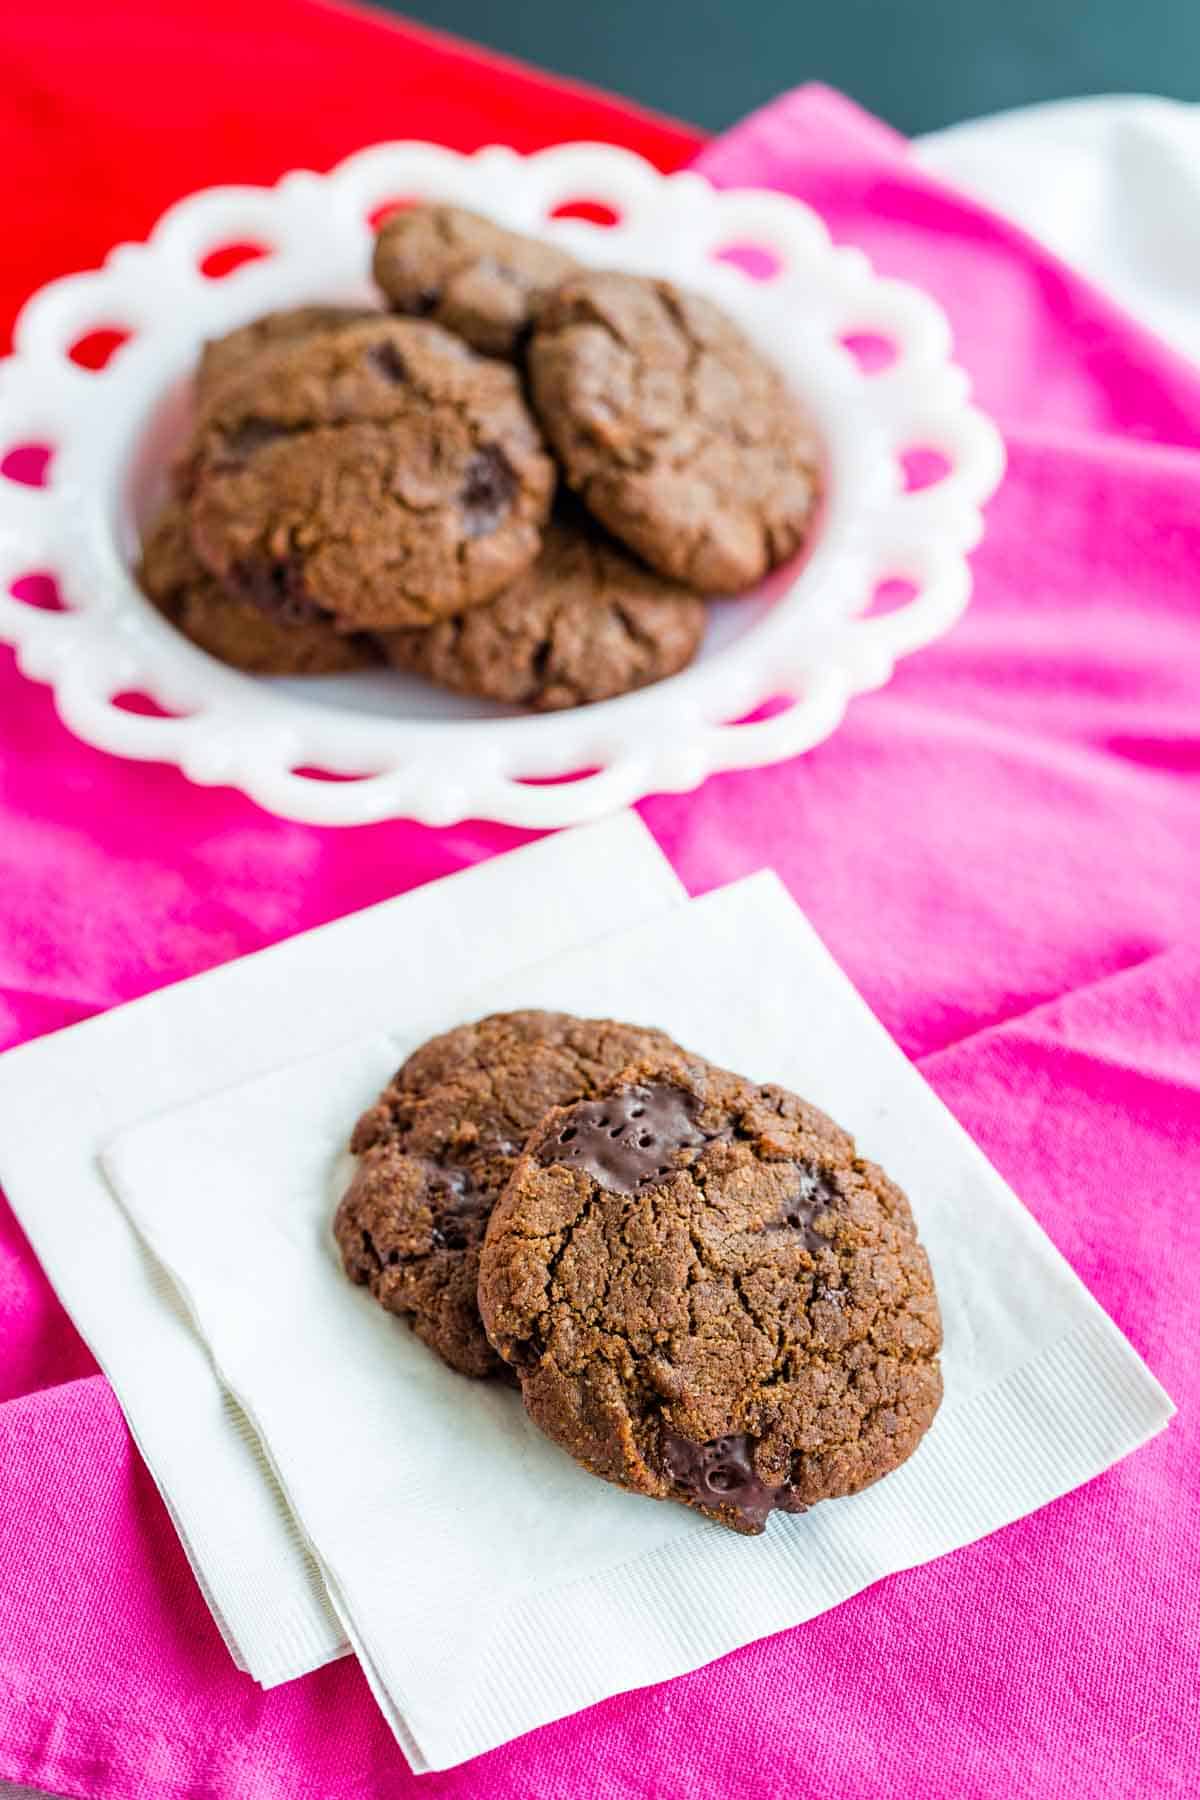 Two dark chocolate chunk cookies are shown on napkins with a plate of cookies behind them on a pink tablecloth.